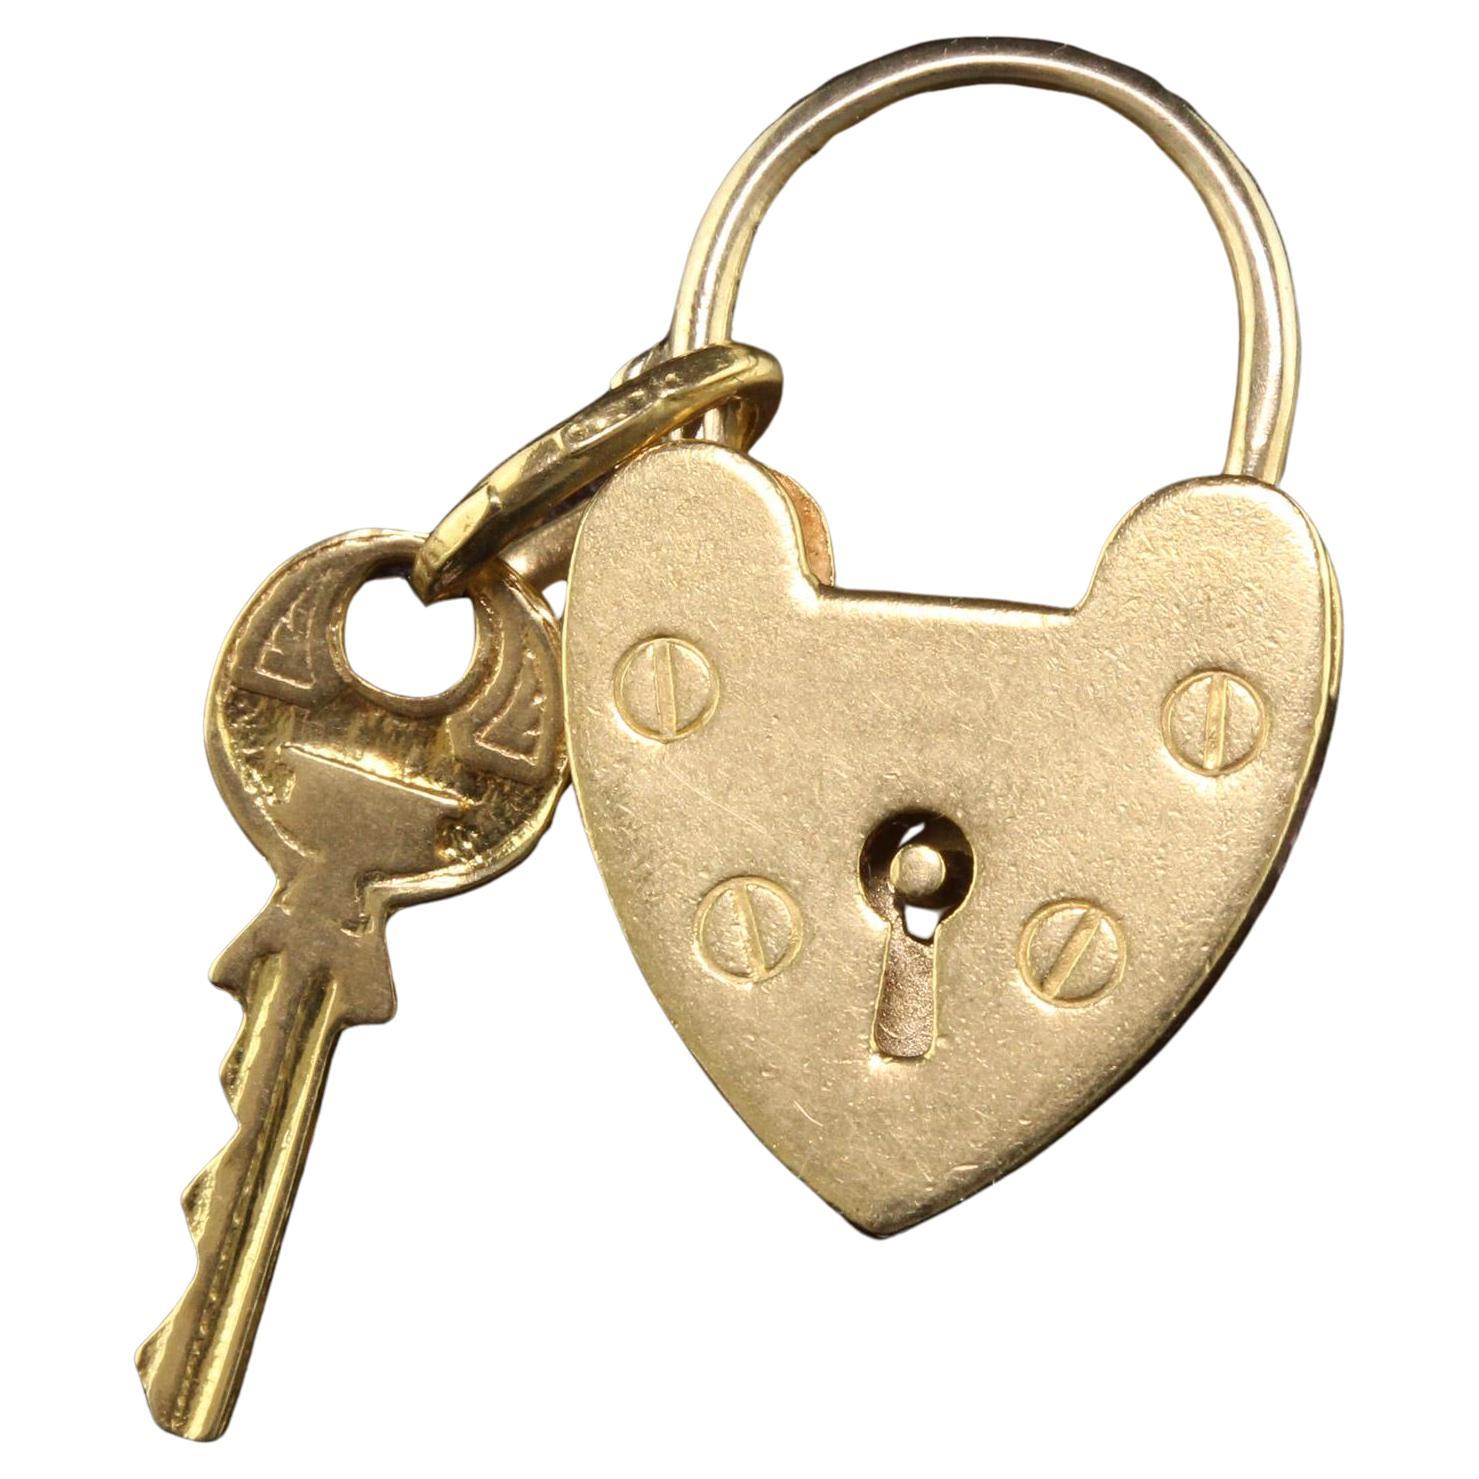 What is a heart lock?